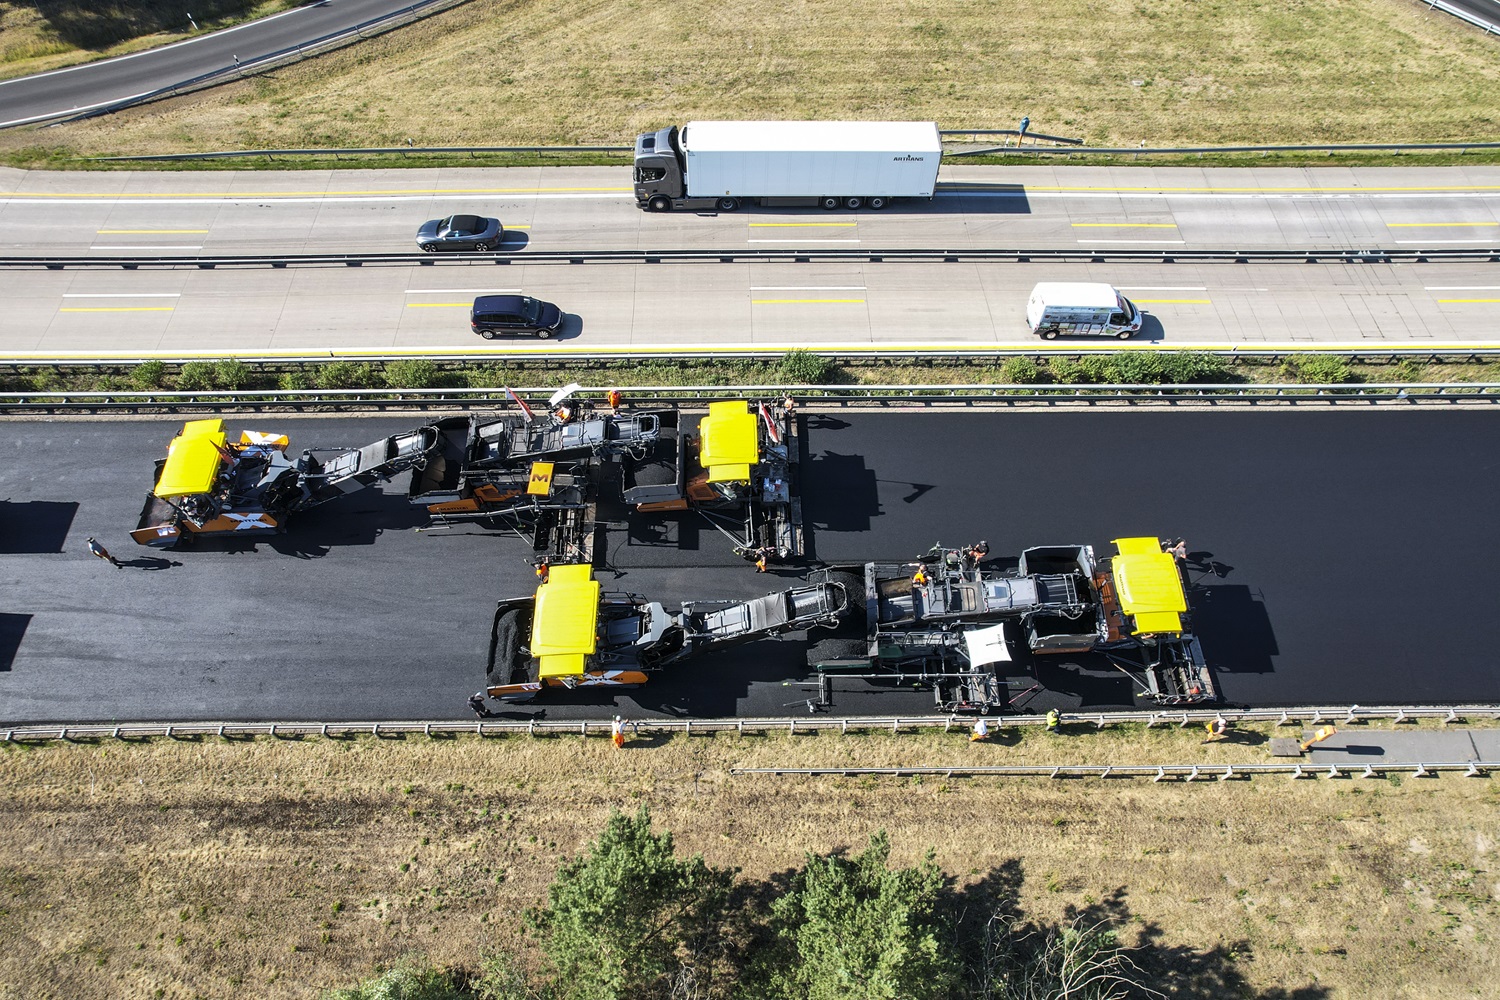 Fast, high quality and resource-friendly paving: with the two InLine-Pave-paving trains from Vögele, the lead contractor rehabilitated a 4.2 km (2.6 mile) section of the southern part of Berlin’s orbital road within the space of only two days.